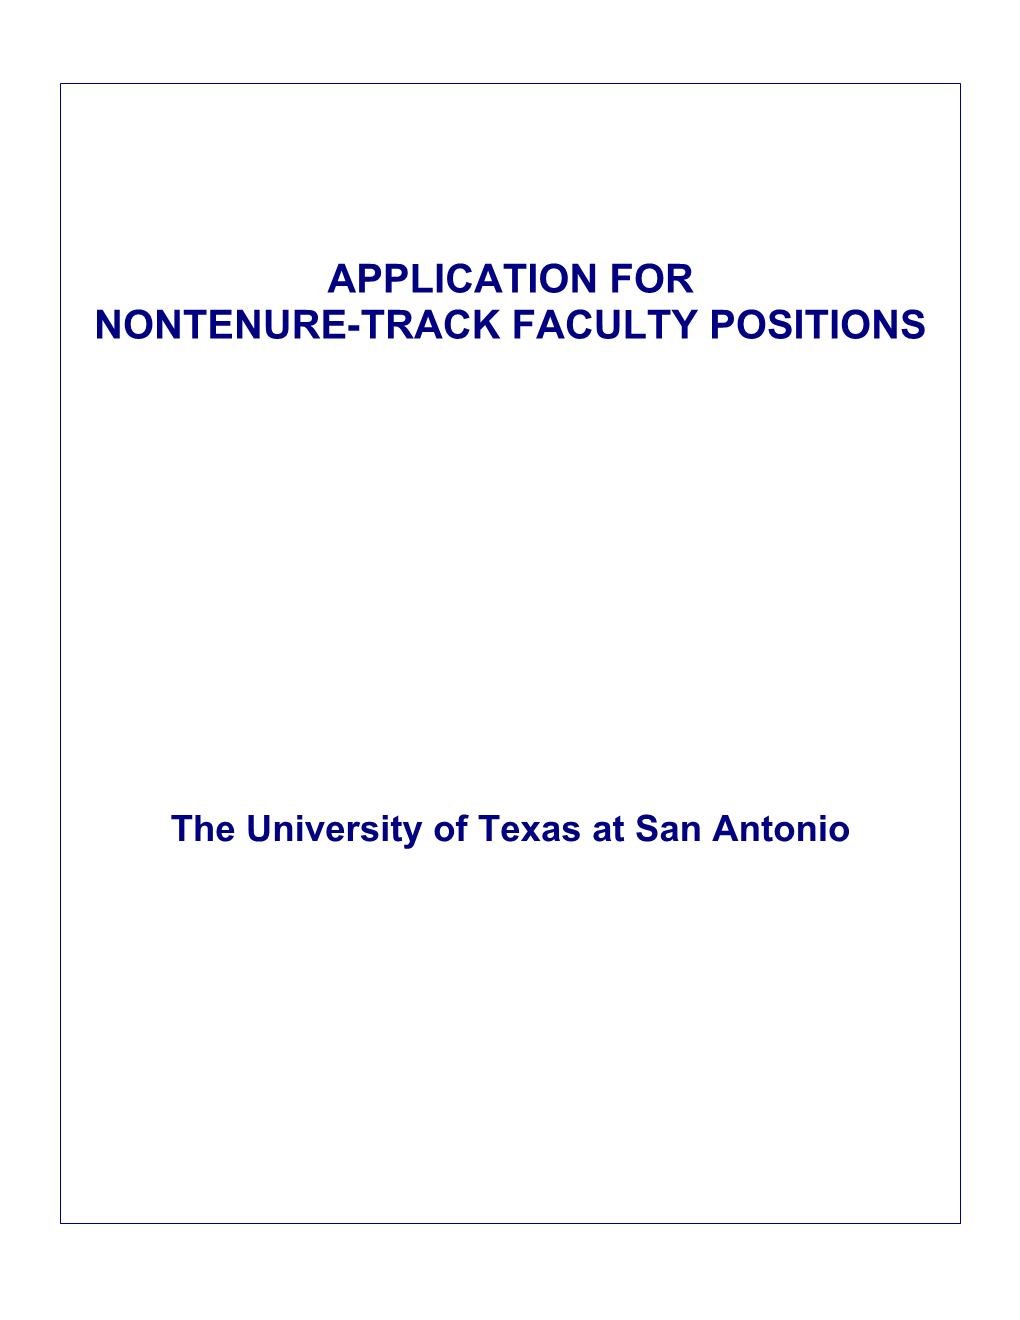 Nontenure-Track Faculty Positions